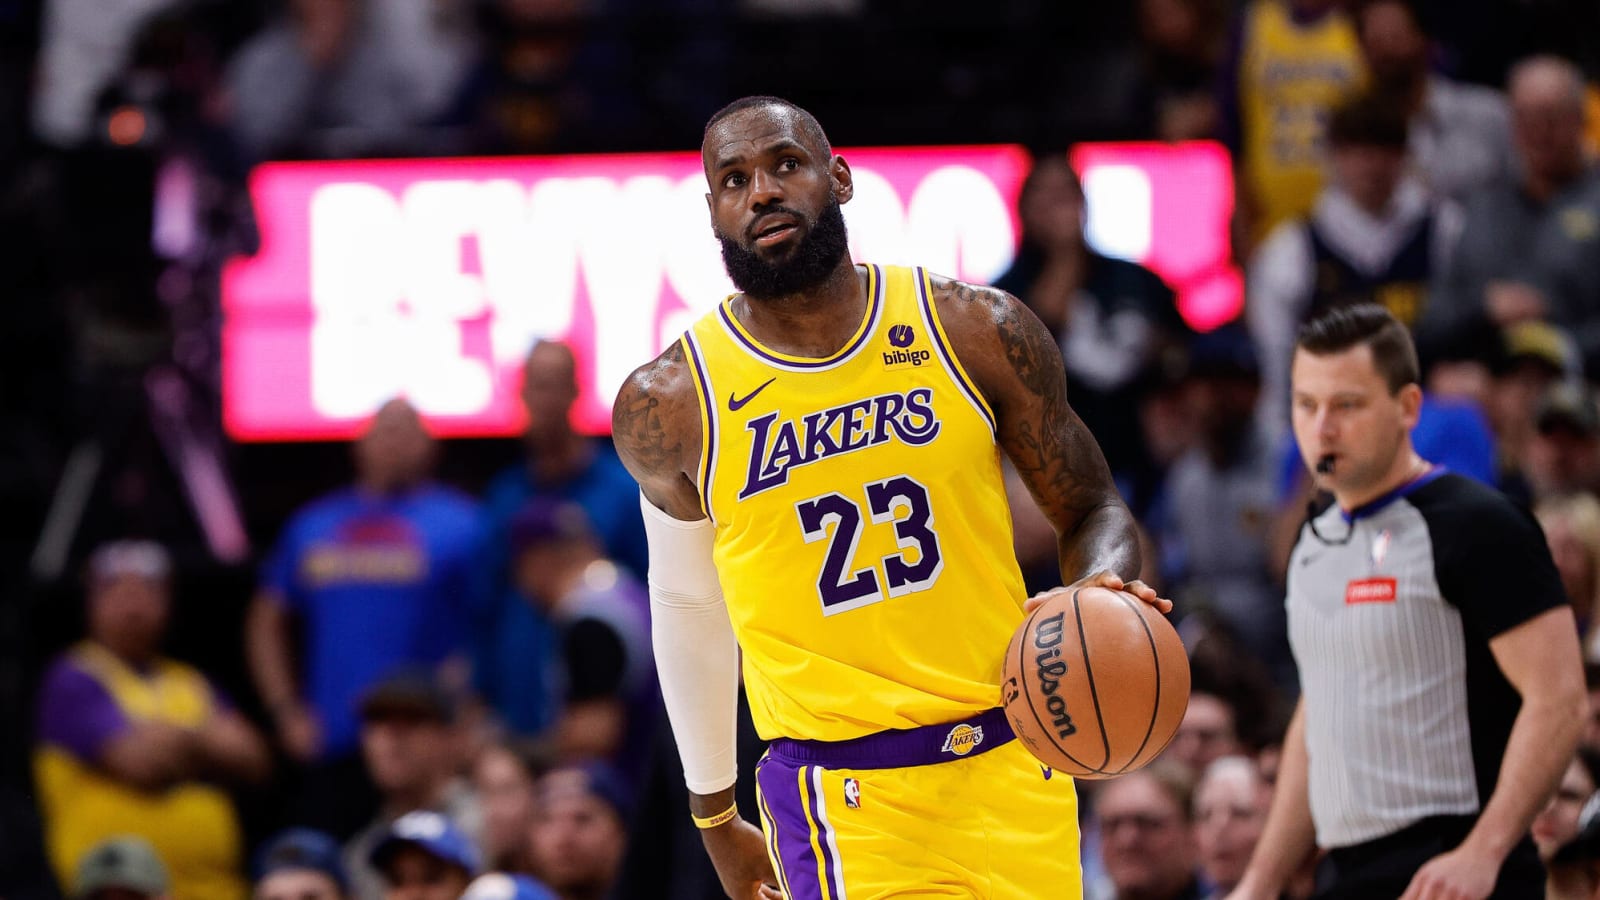 Report: Lakers ‘Very Open’ To Drafting Bronny James So LeBron James Can Play With Him